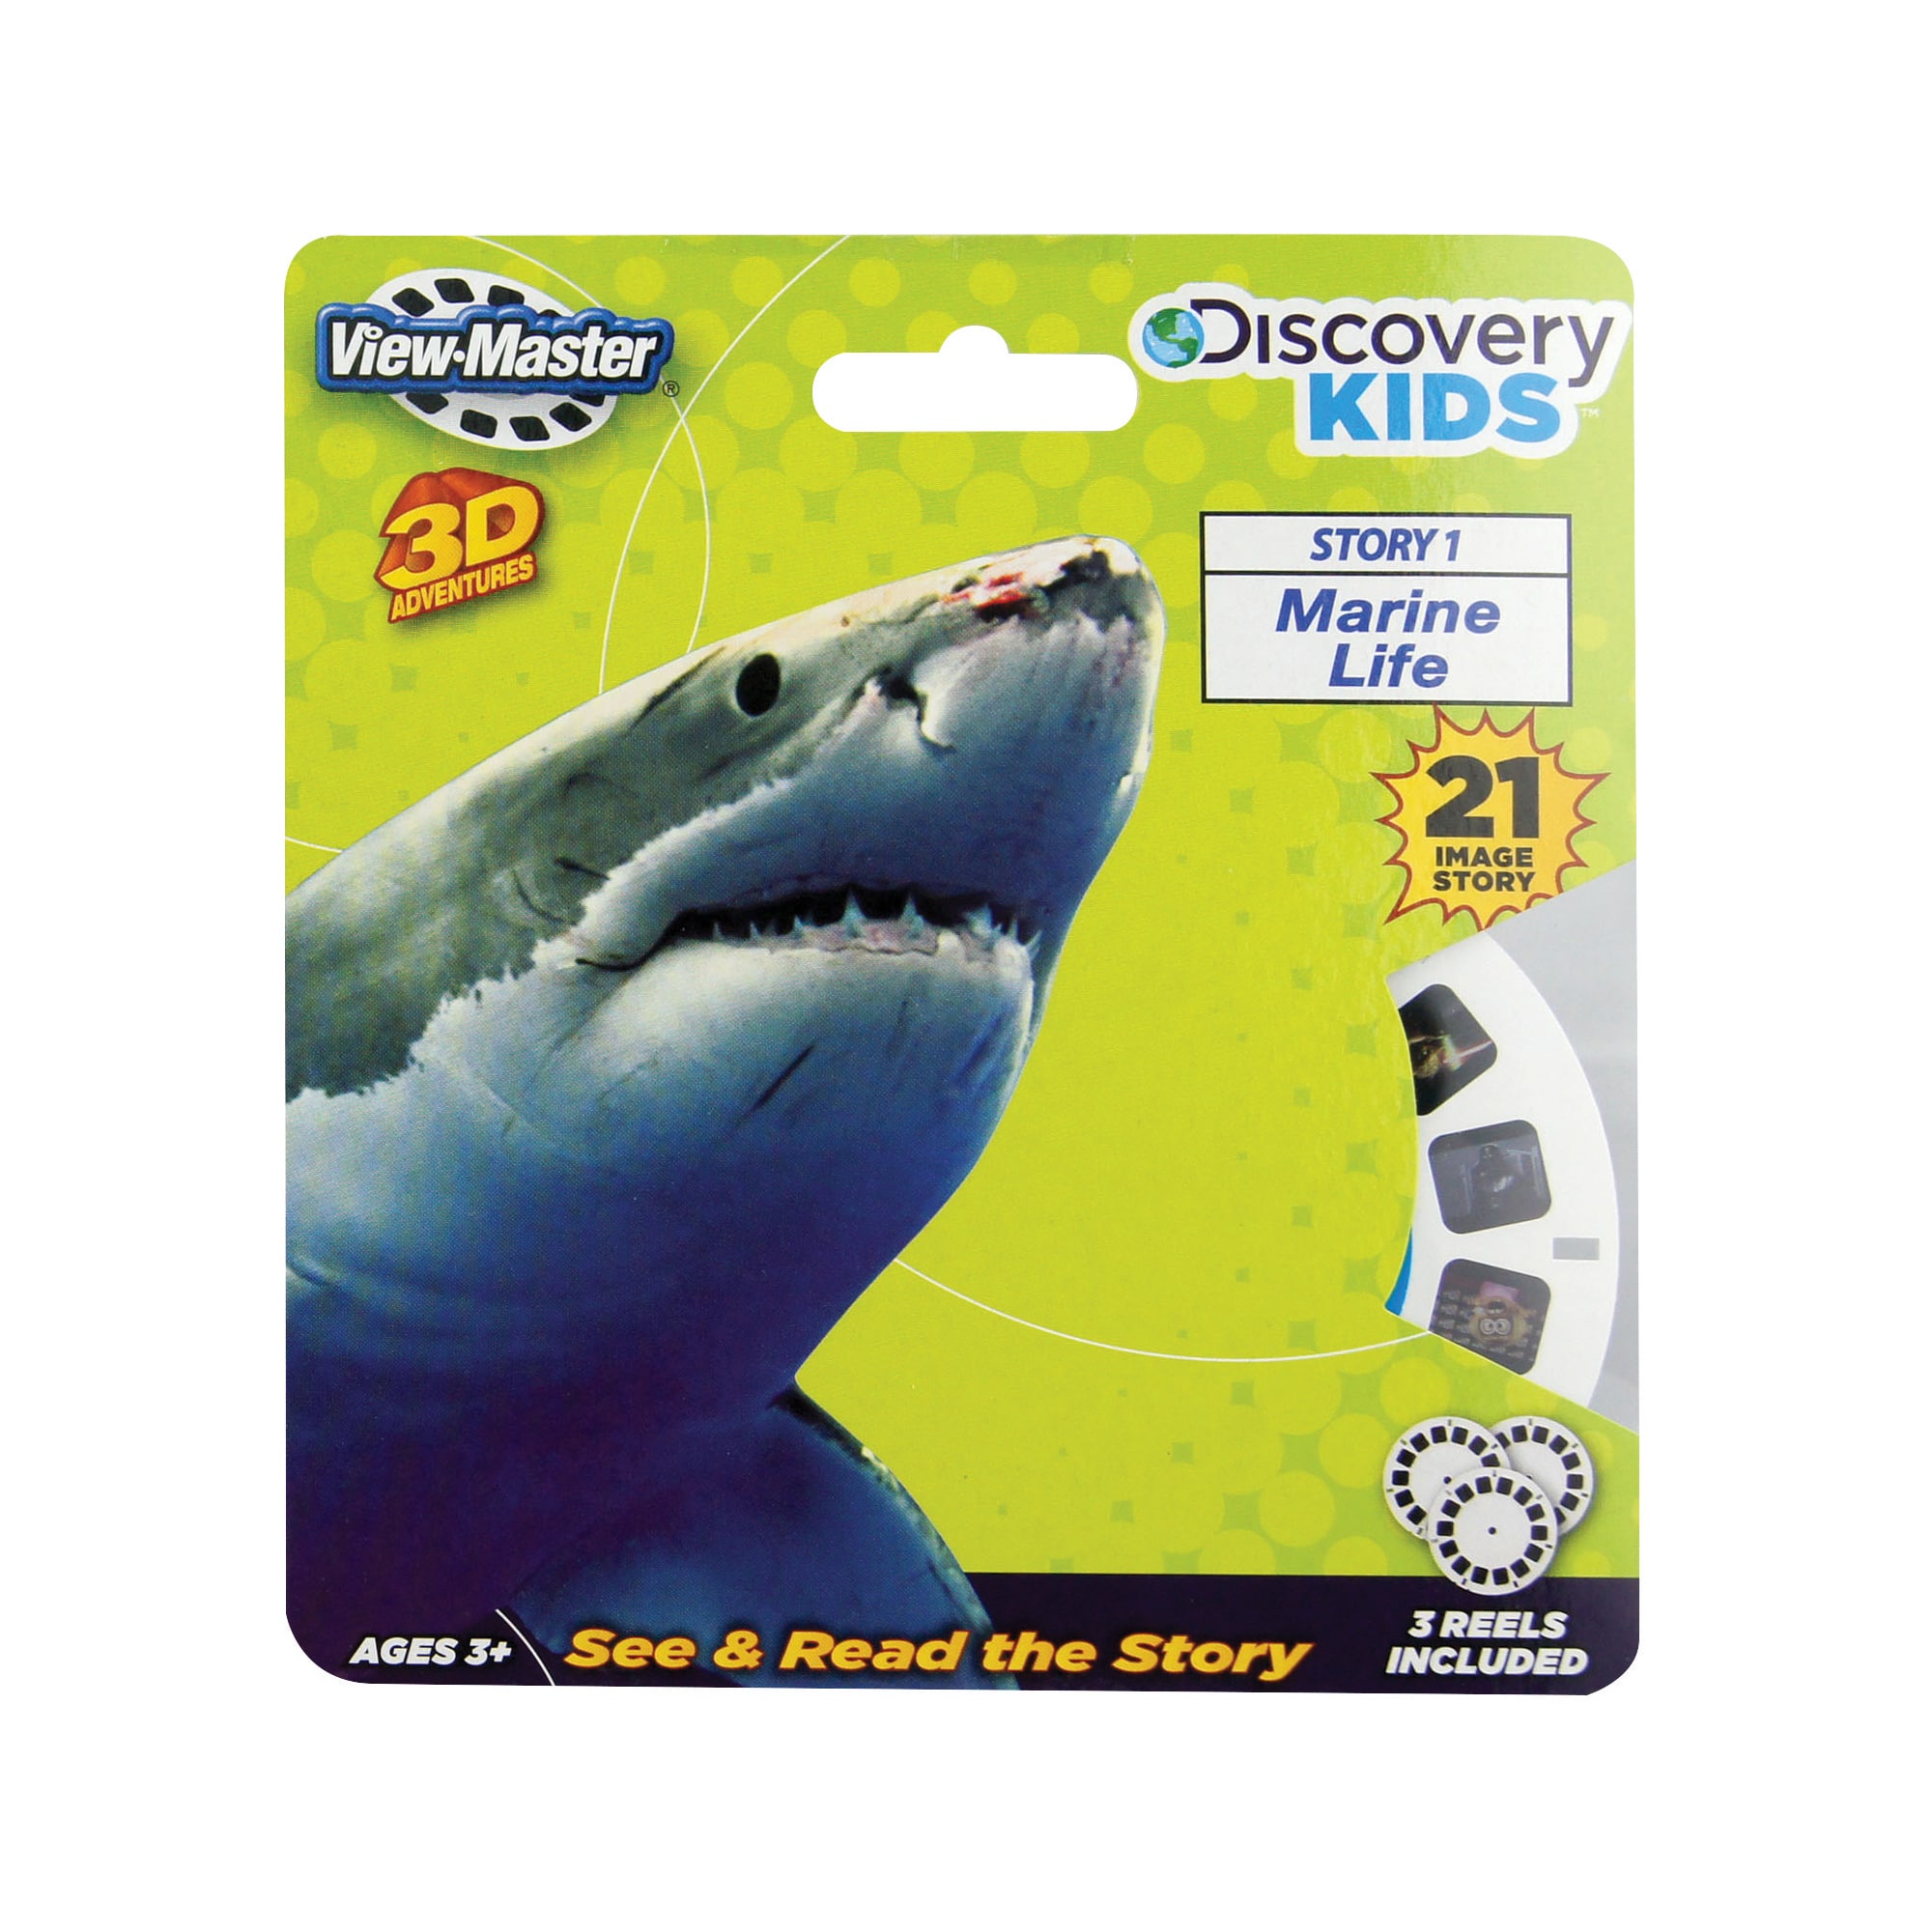  Discovery Kids ViewMaster 3D Marine Life - Full 3 Reel Set by  3Dstereo ViewMaster : Toys & Games